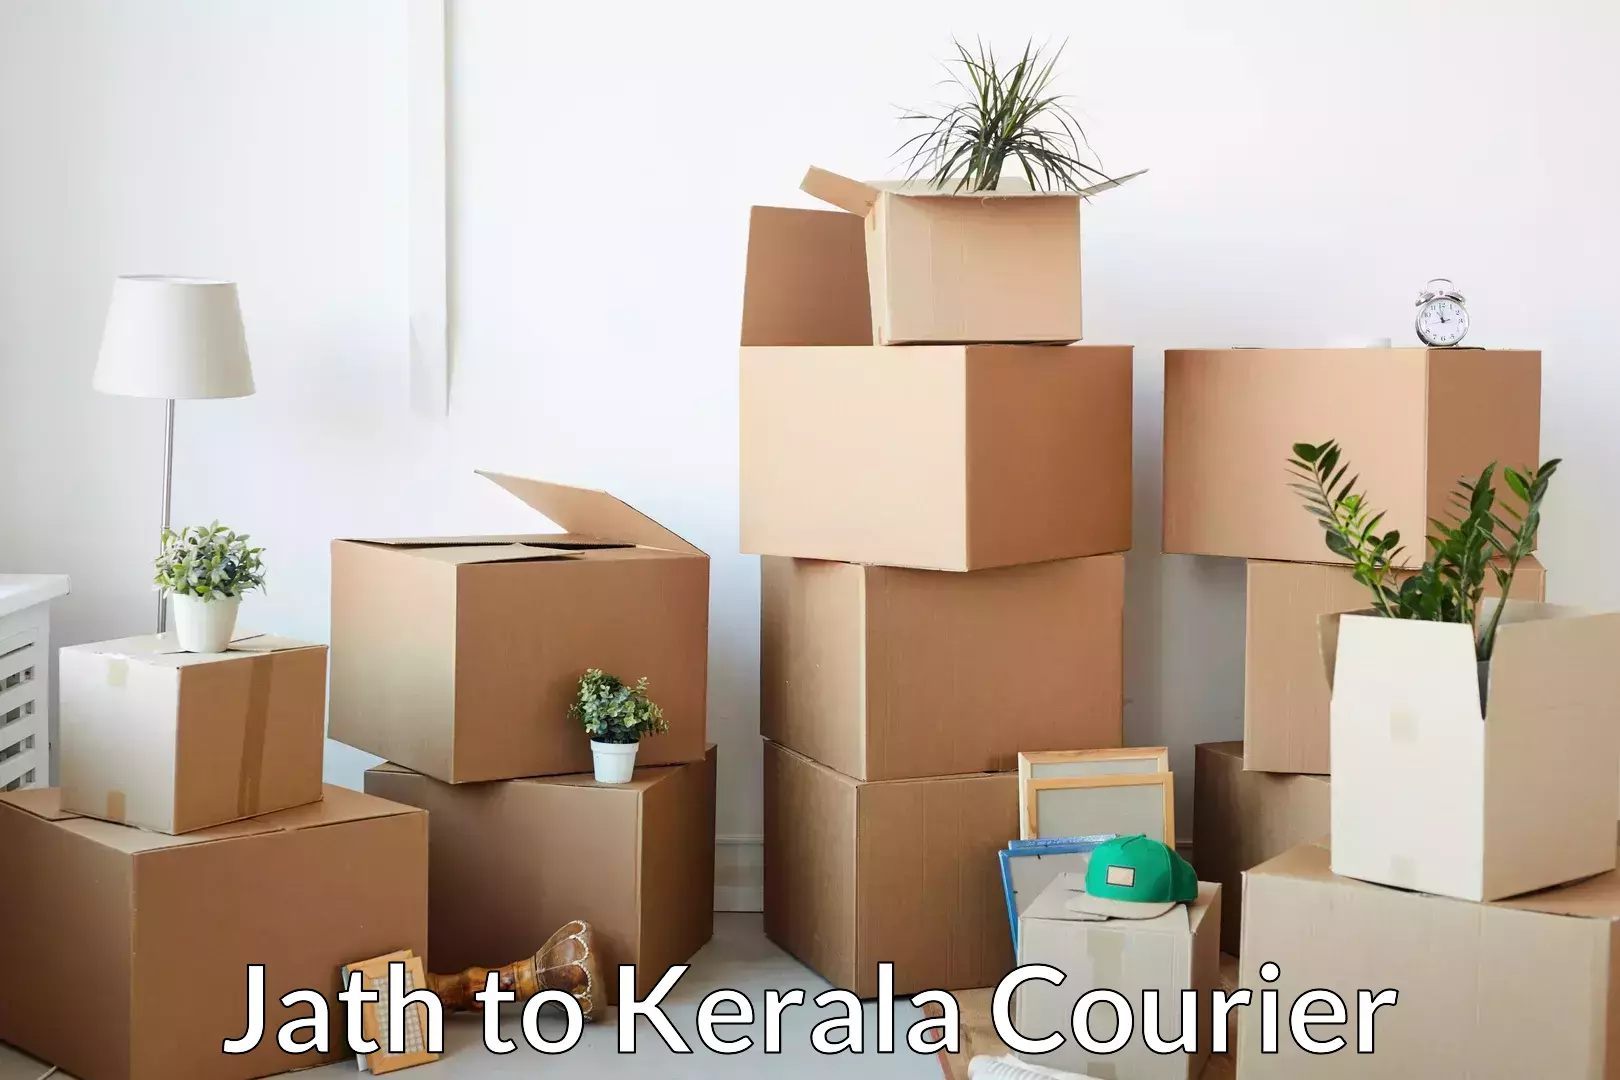 Household moving experts Jath to Kerala